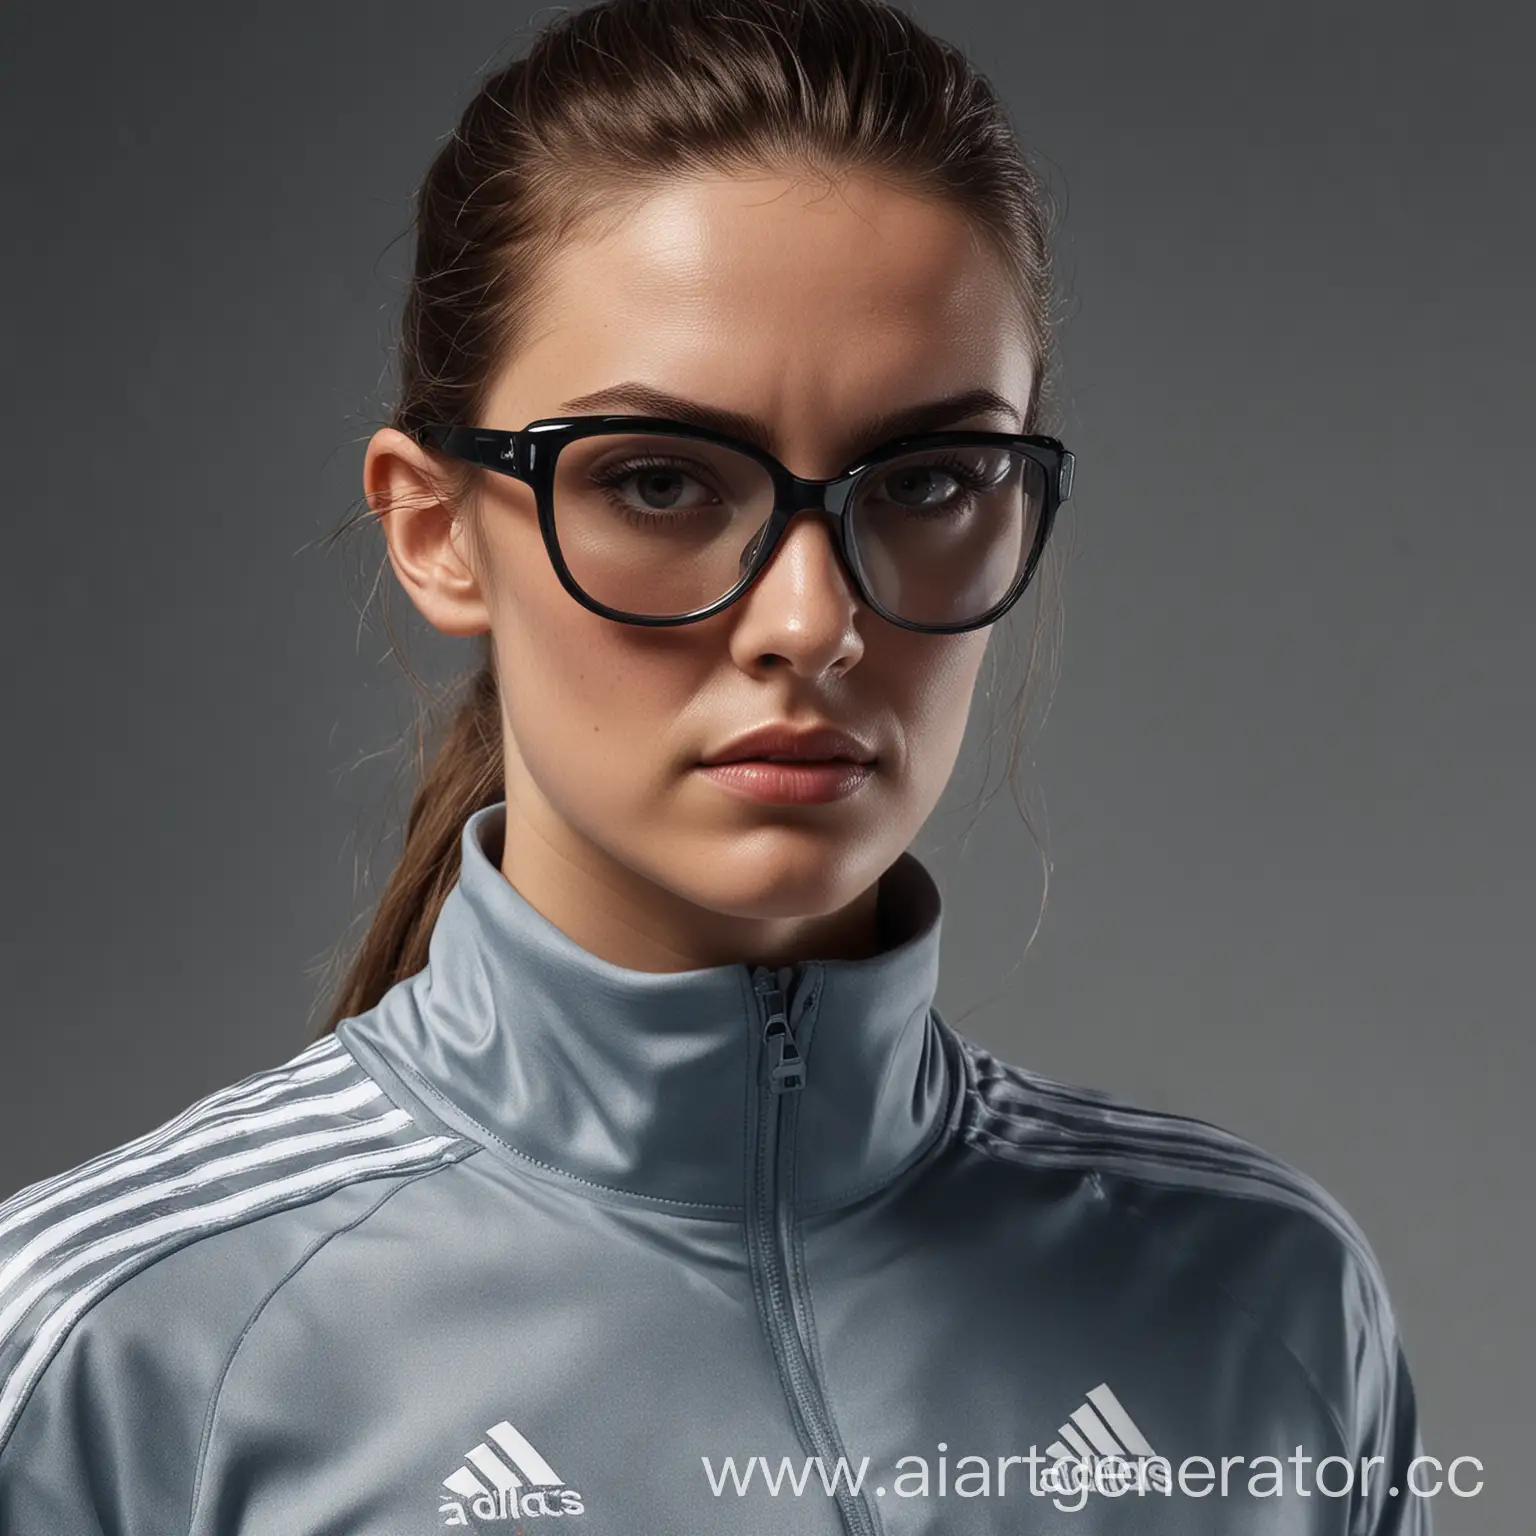 Athletic-Woman-in-Adidas-Sports-Suit-and-Glasses-Photorealistic-Photography